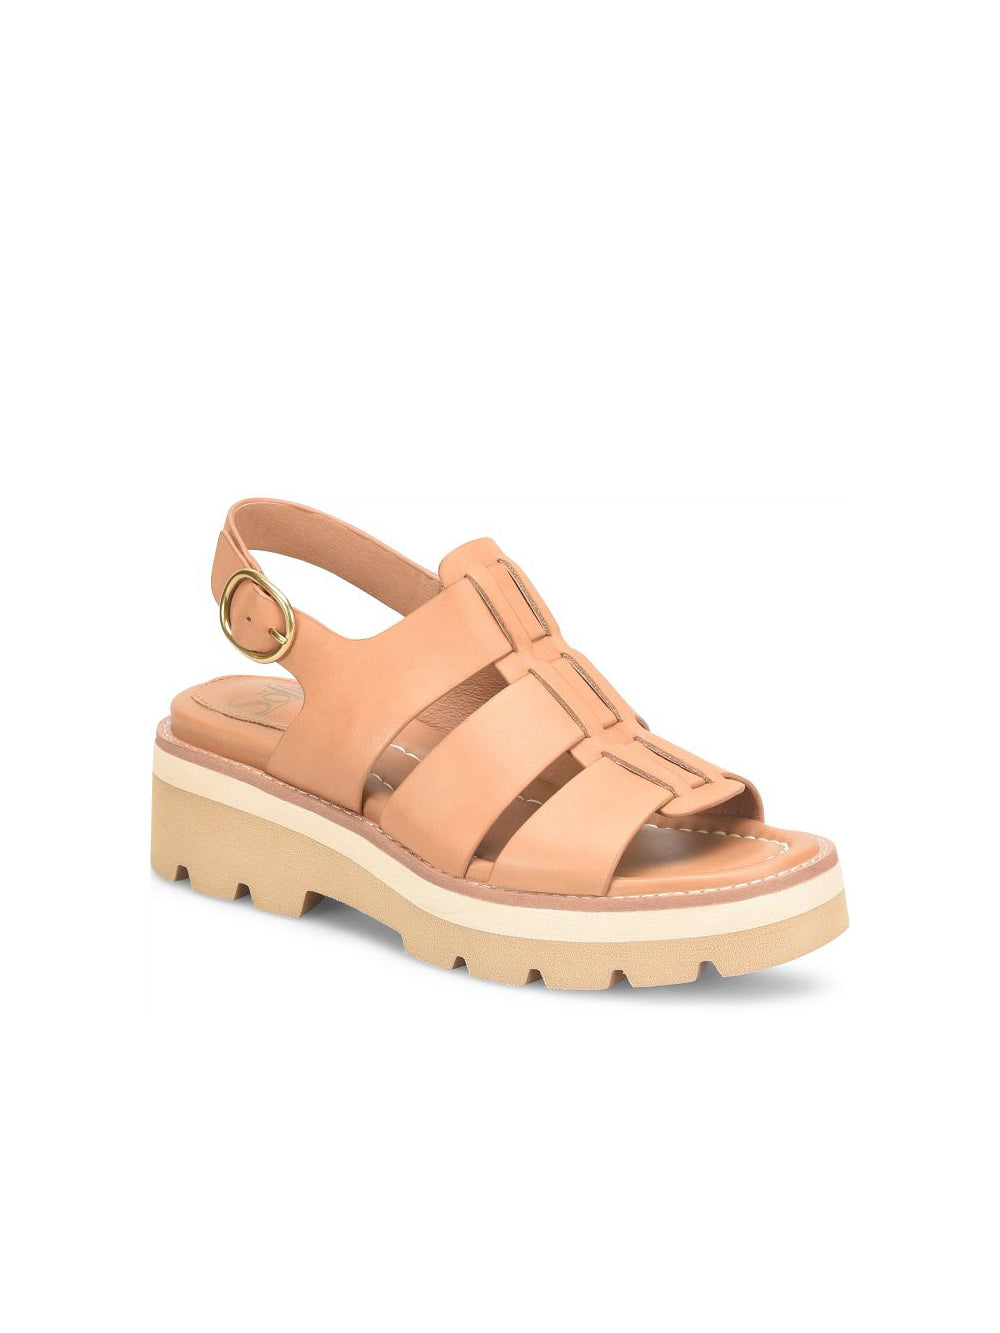 sofft shoes patrina lugg platform wedge sandal in luggage tan